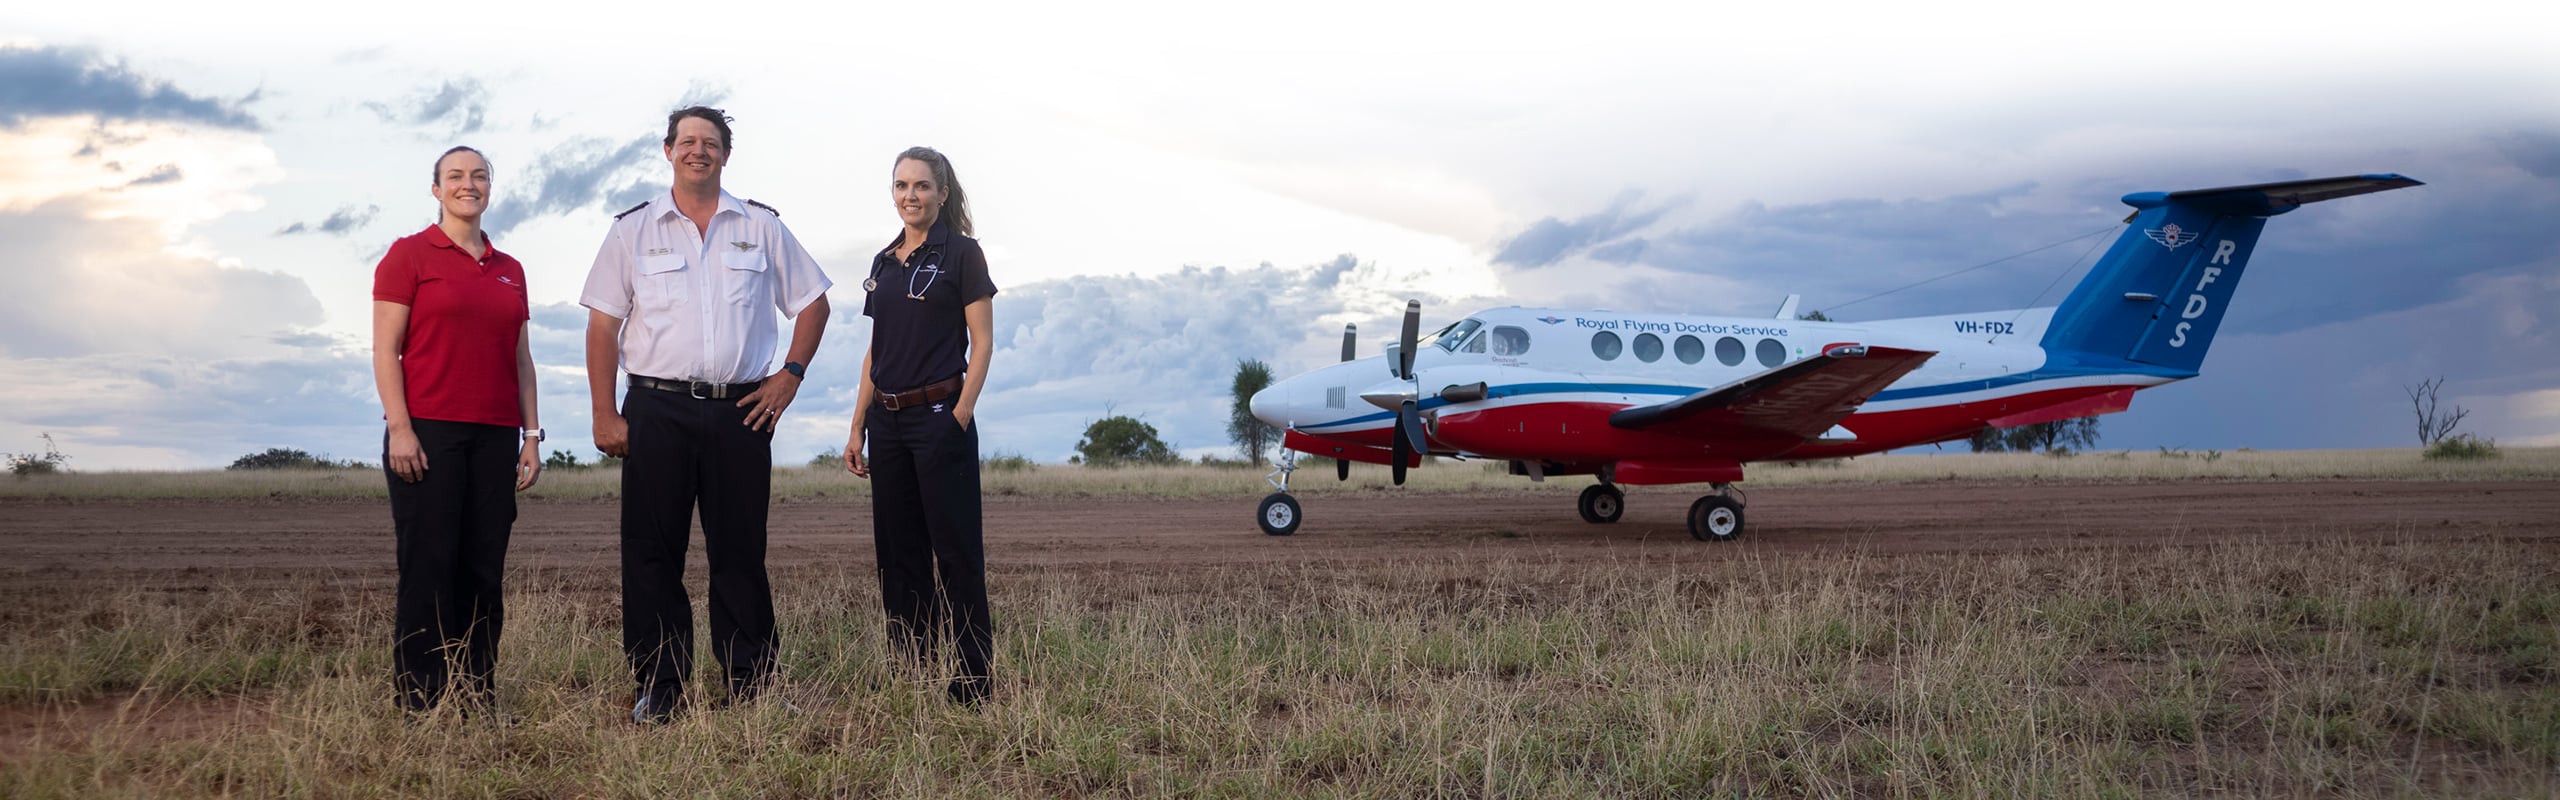 RFDS pilot, doctor, and nurse in front of aircraft, ready for a life-saving mission